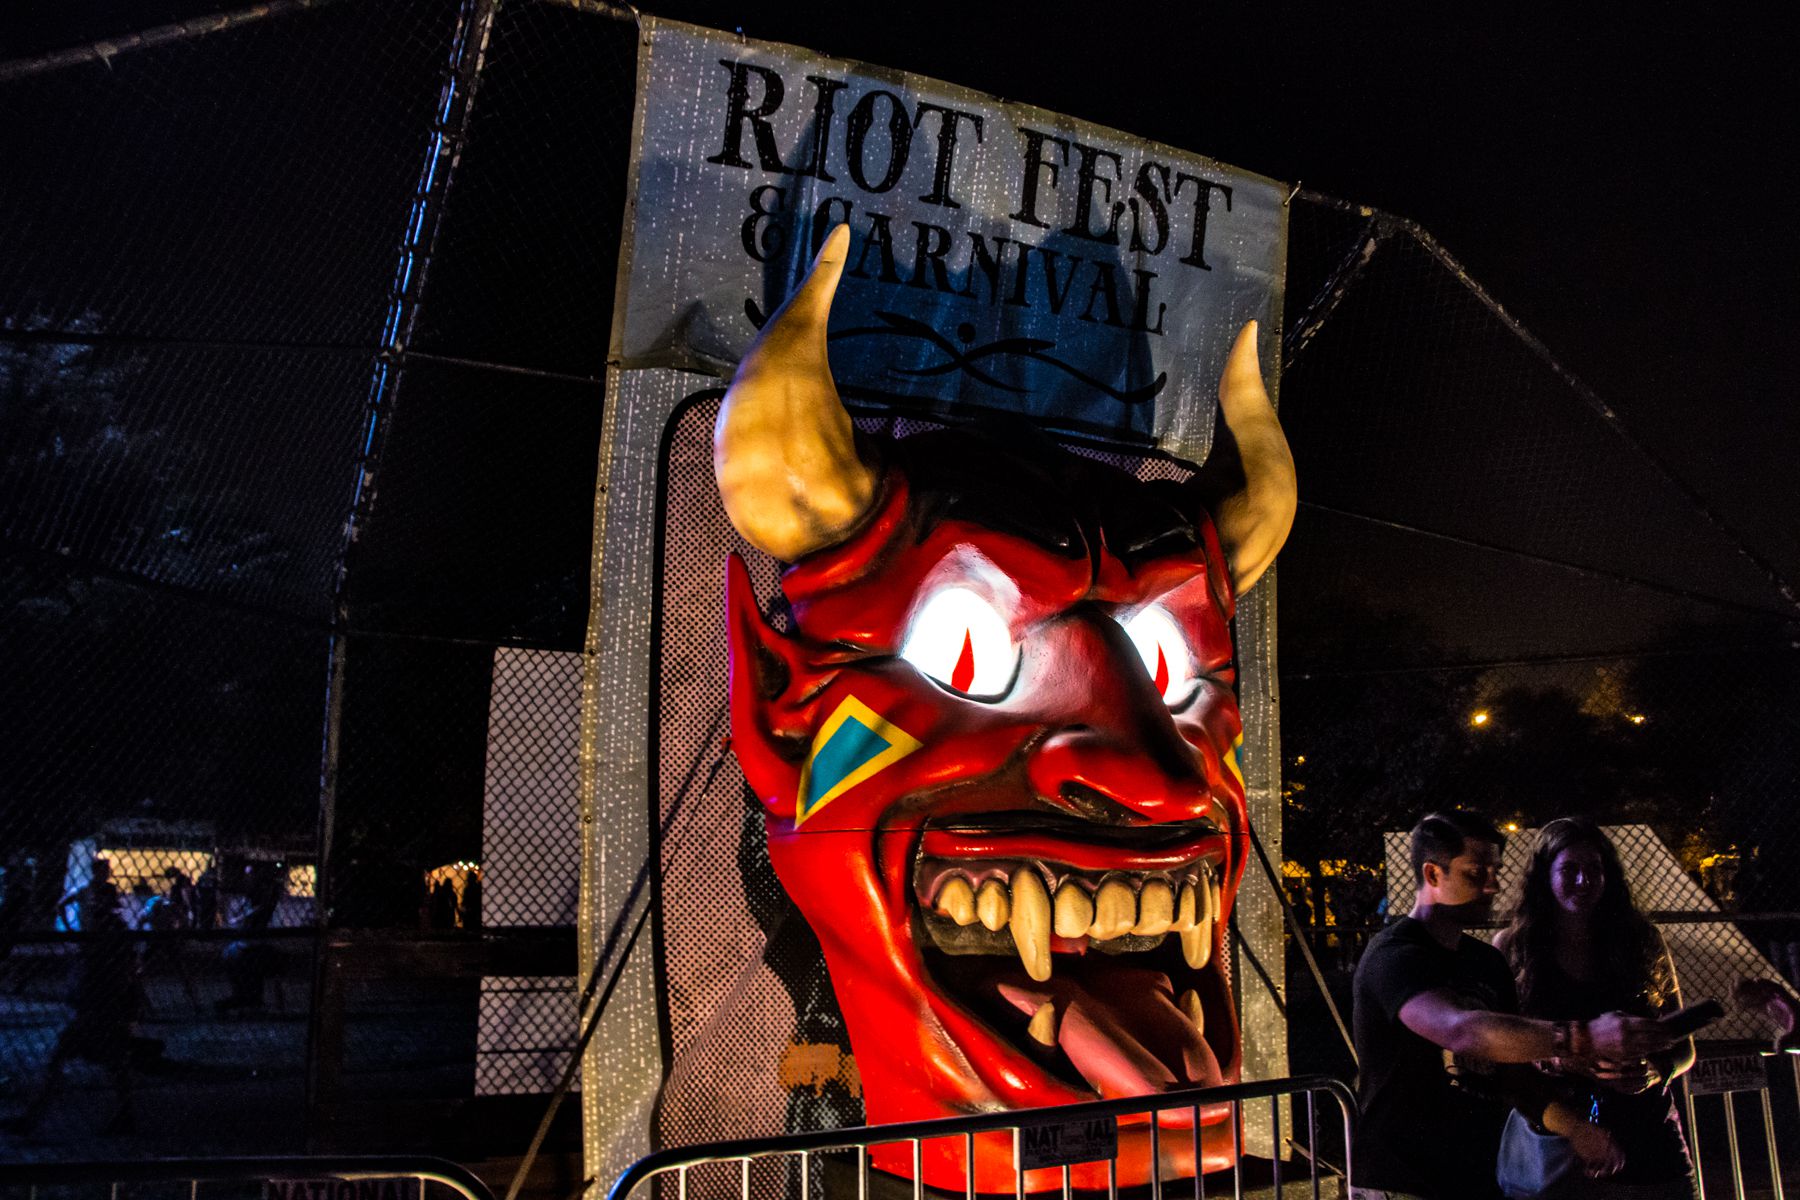 day 1 1 lior phillips Riot Fest 2017 Festival Review: From Worst to Best